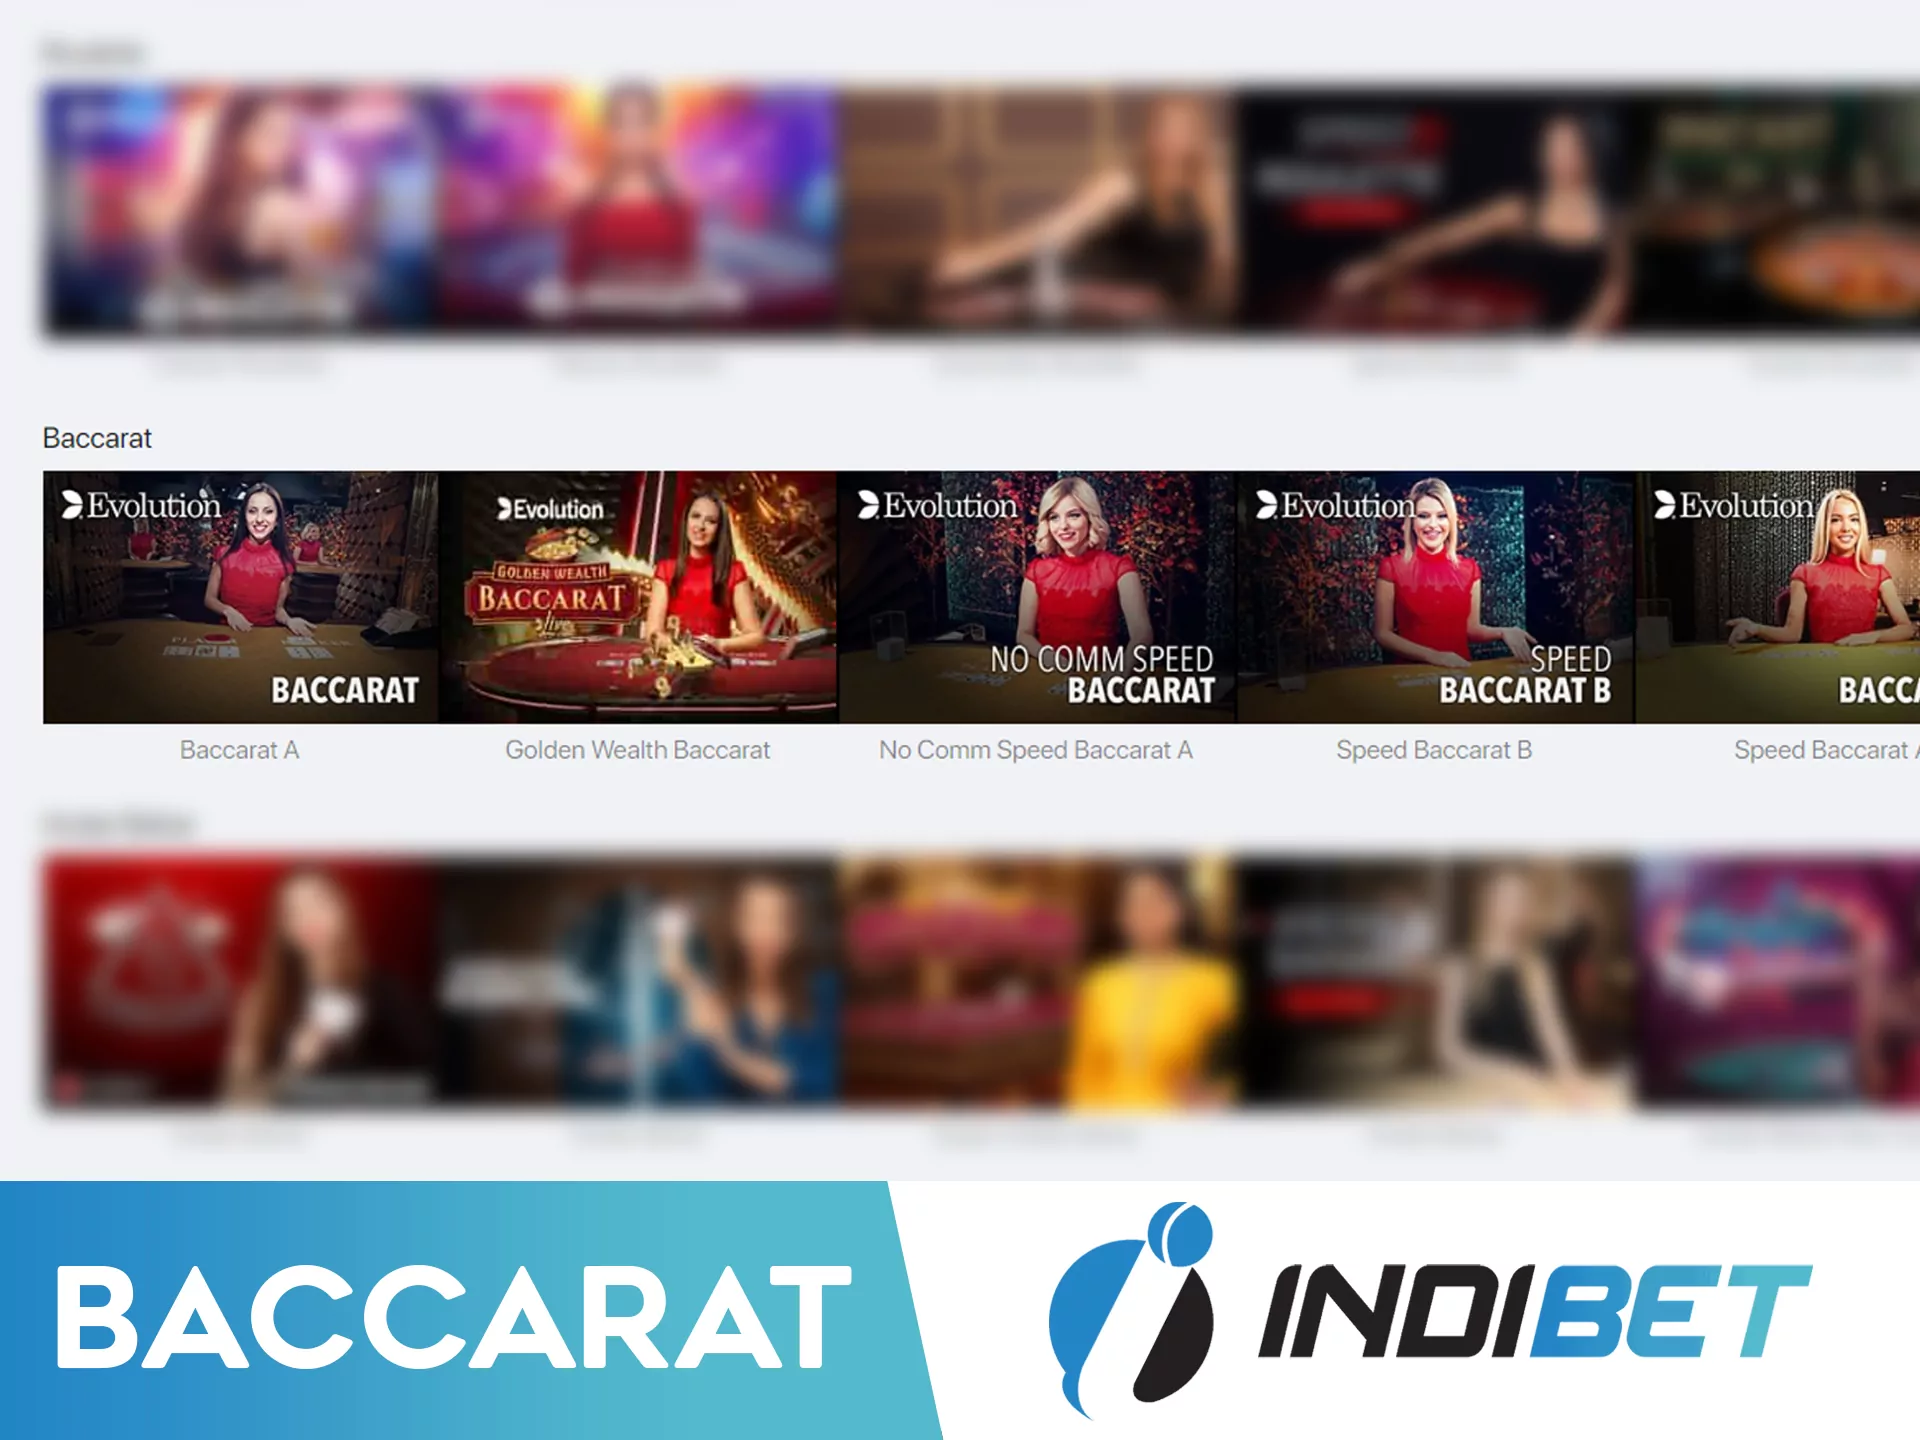 You can also play baccarat in the Indibet online casino.